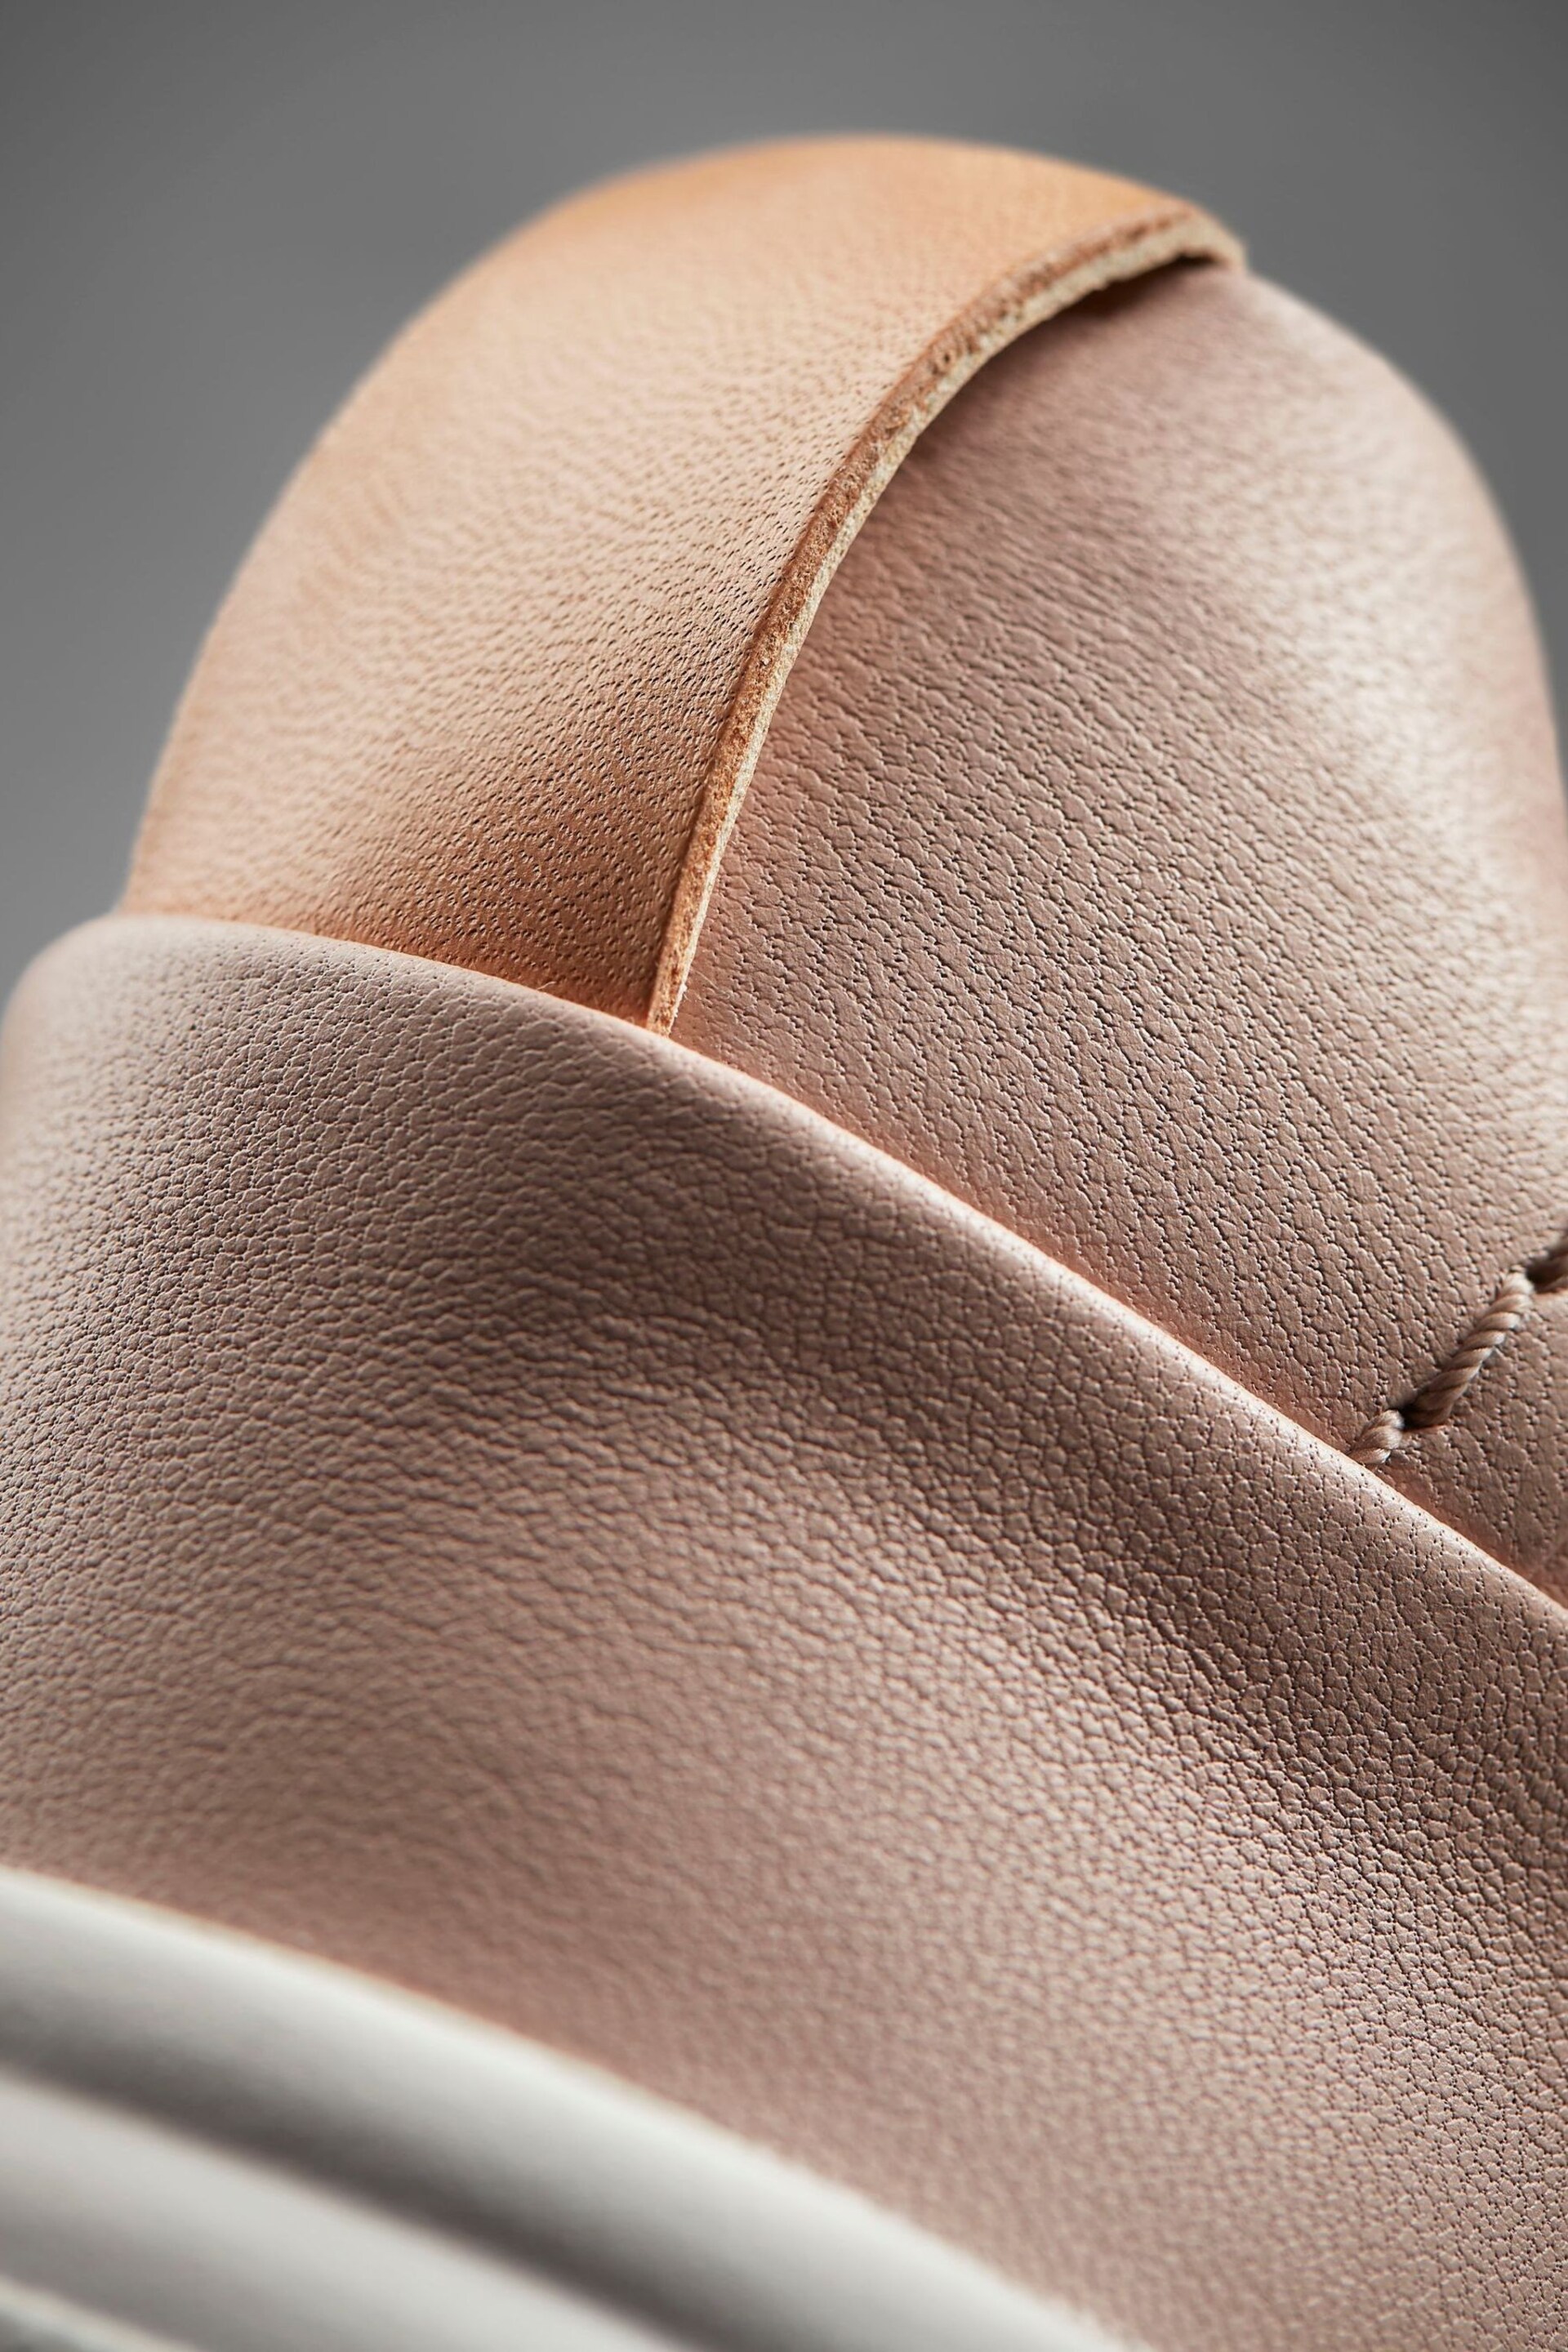 Clarks Pink Leather Hollyhock Walk Shoes - Image 3 of 10